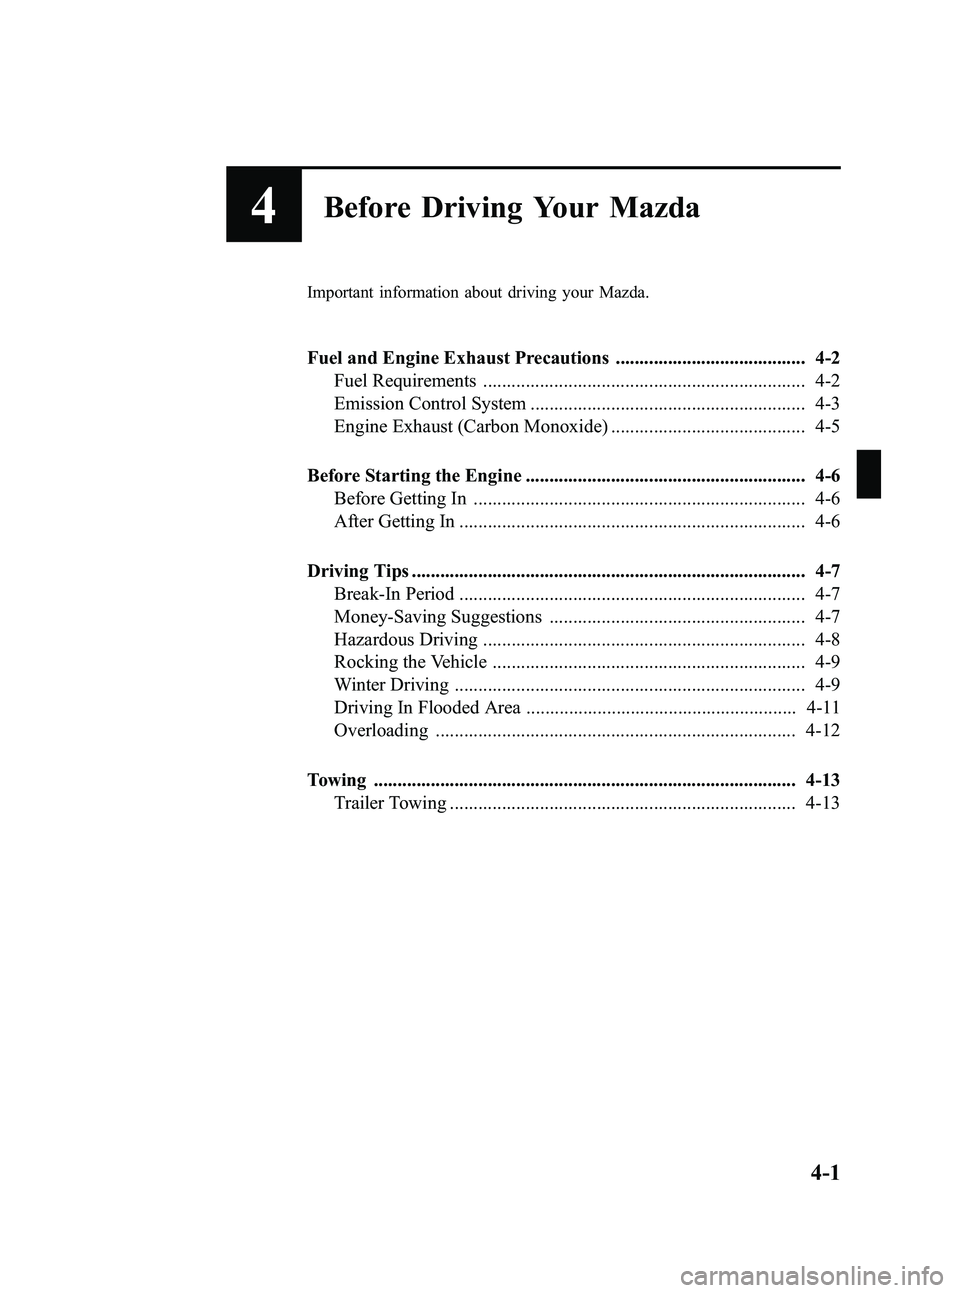 MAZDA MODEL 5 2006  Owners Manual Black plate (101,1)
4Before Driving Your Mazda
Important information about driving your Mazda.
Fuel and Engine Exhaust Precautions ........................................ 4-2Fuel Requirements .......